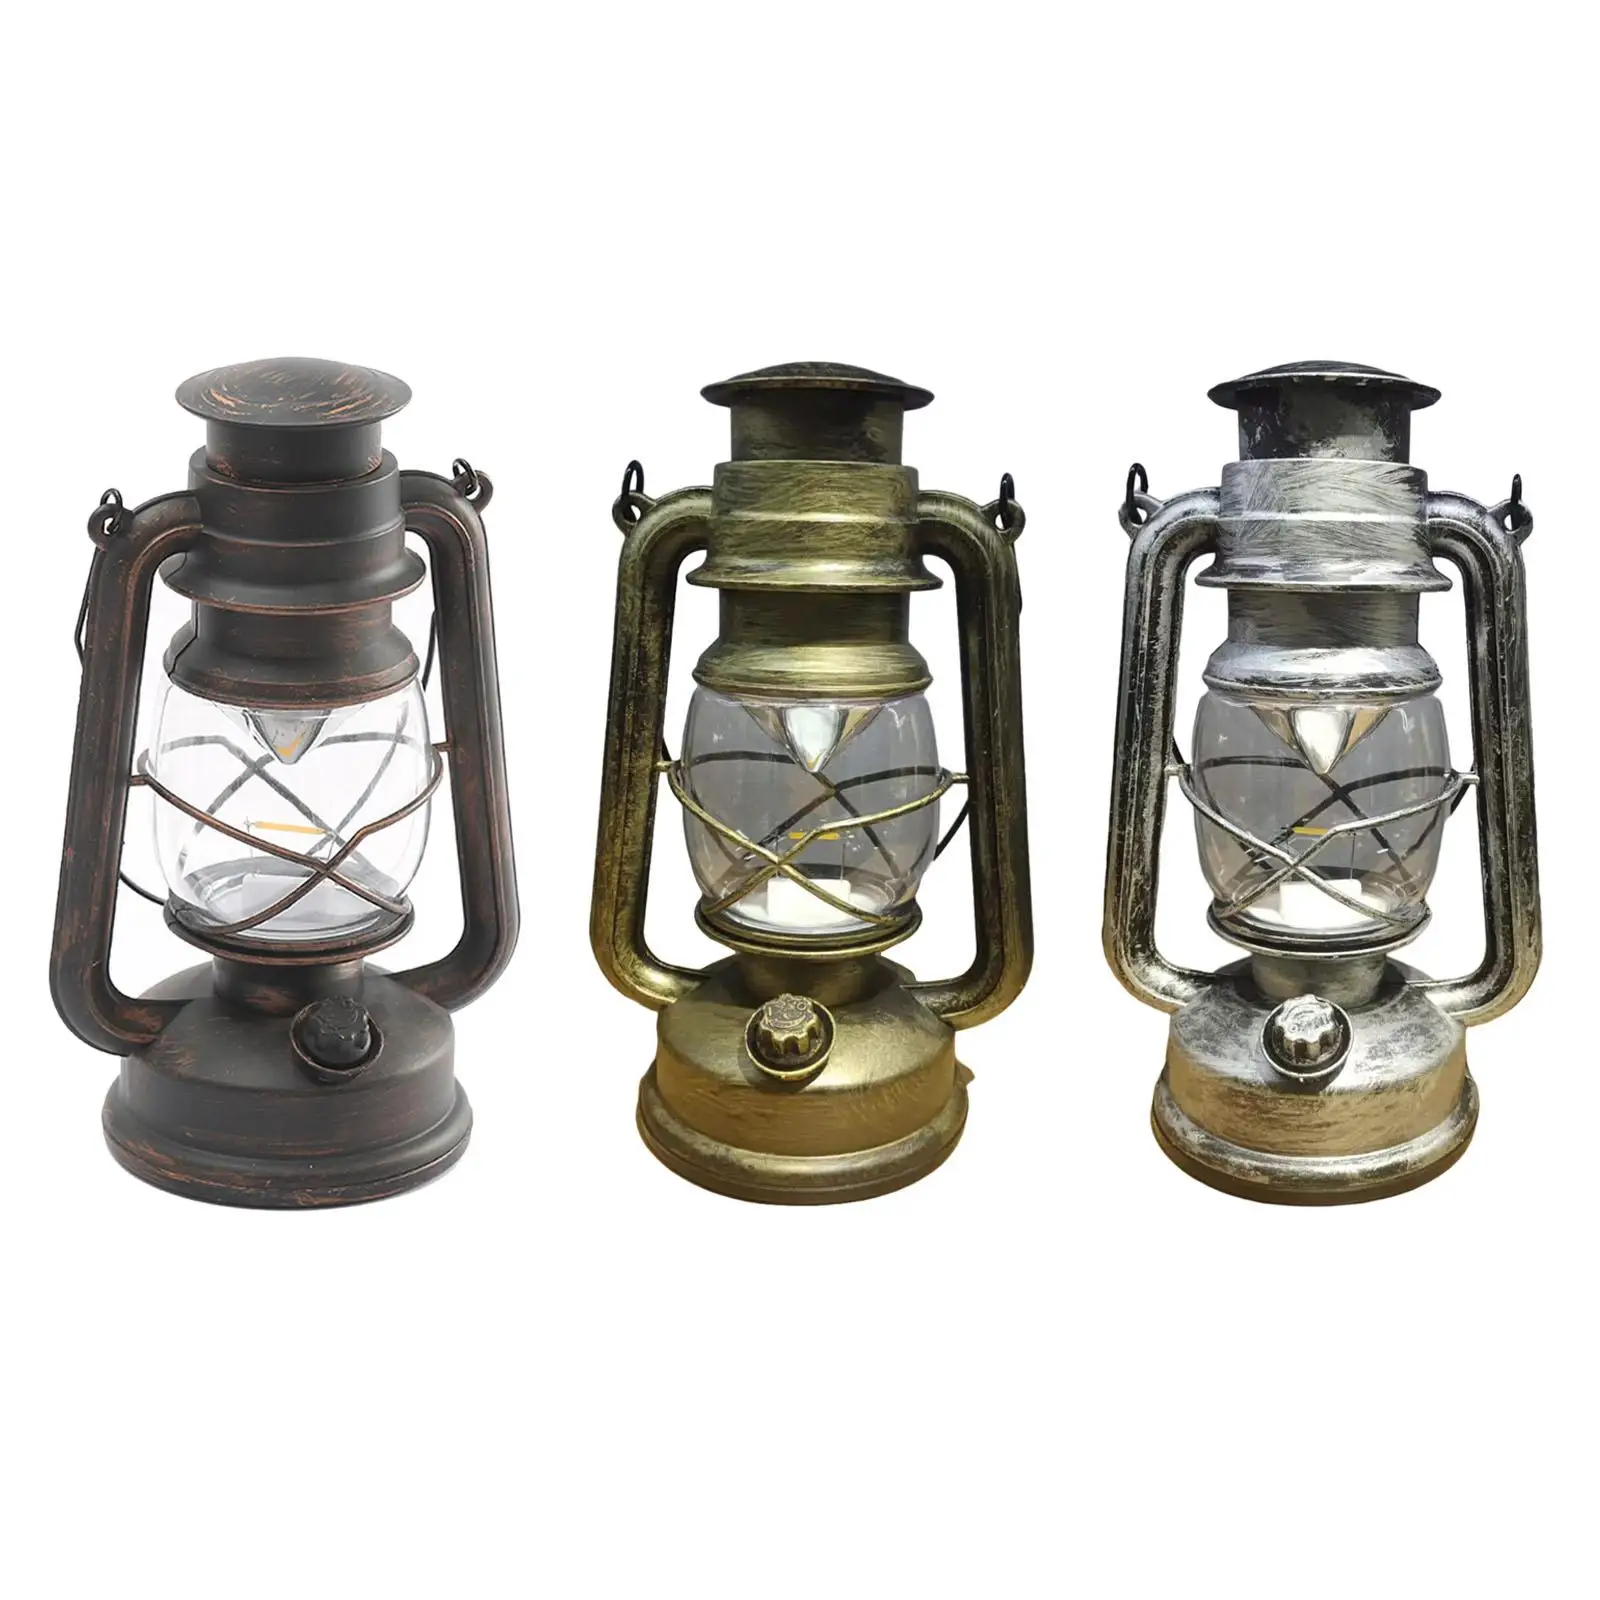 Rustic Oil Lantern Lamp Portable Hanging Lamp Table Lamp for Home Decor